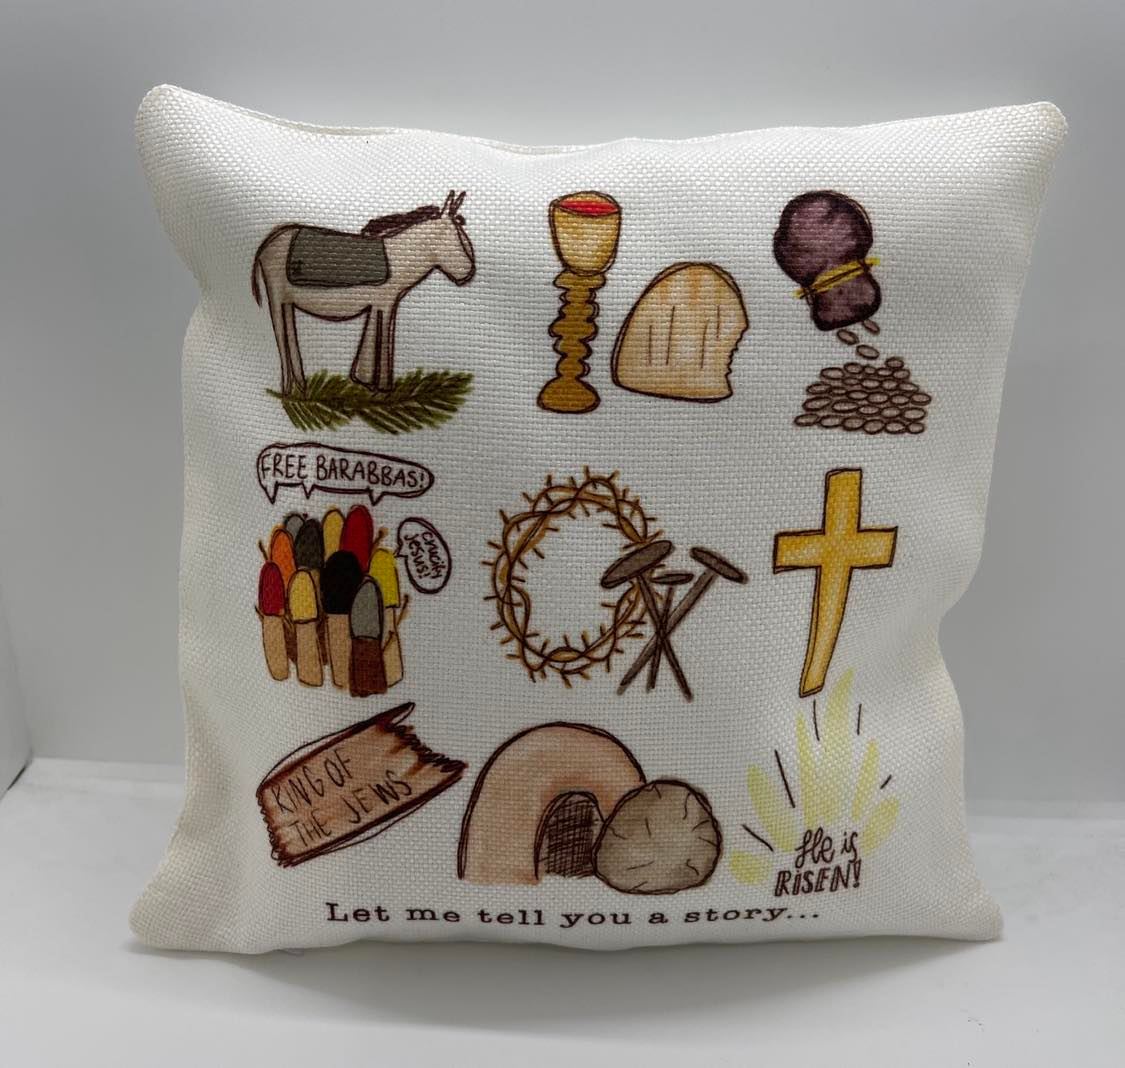 Pillow Cover-Sublimation Blank 10 x 10 White pillow Covers (Worry Pillows)